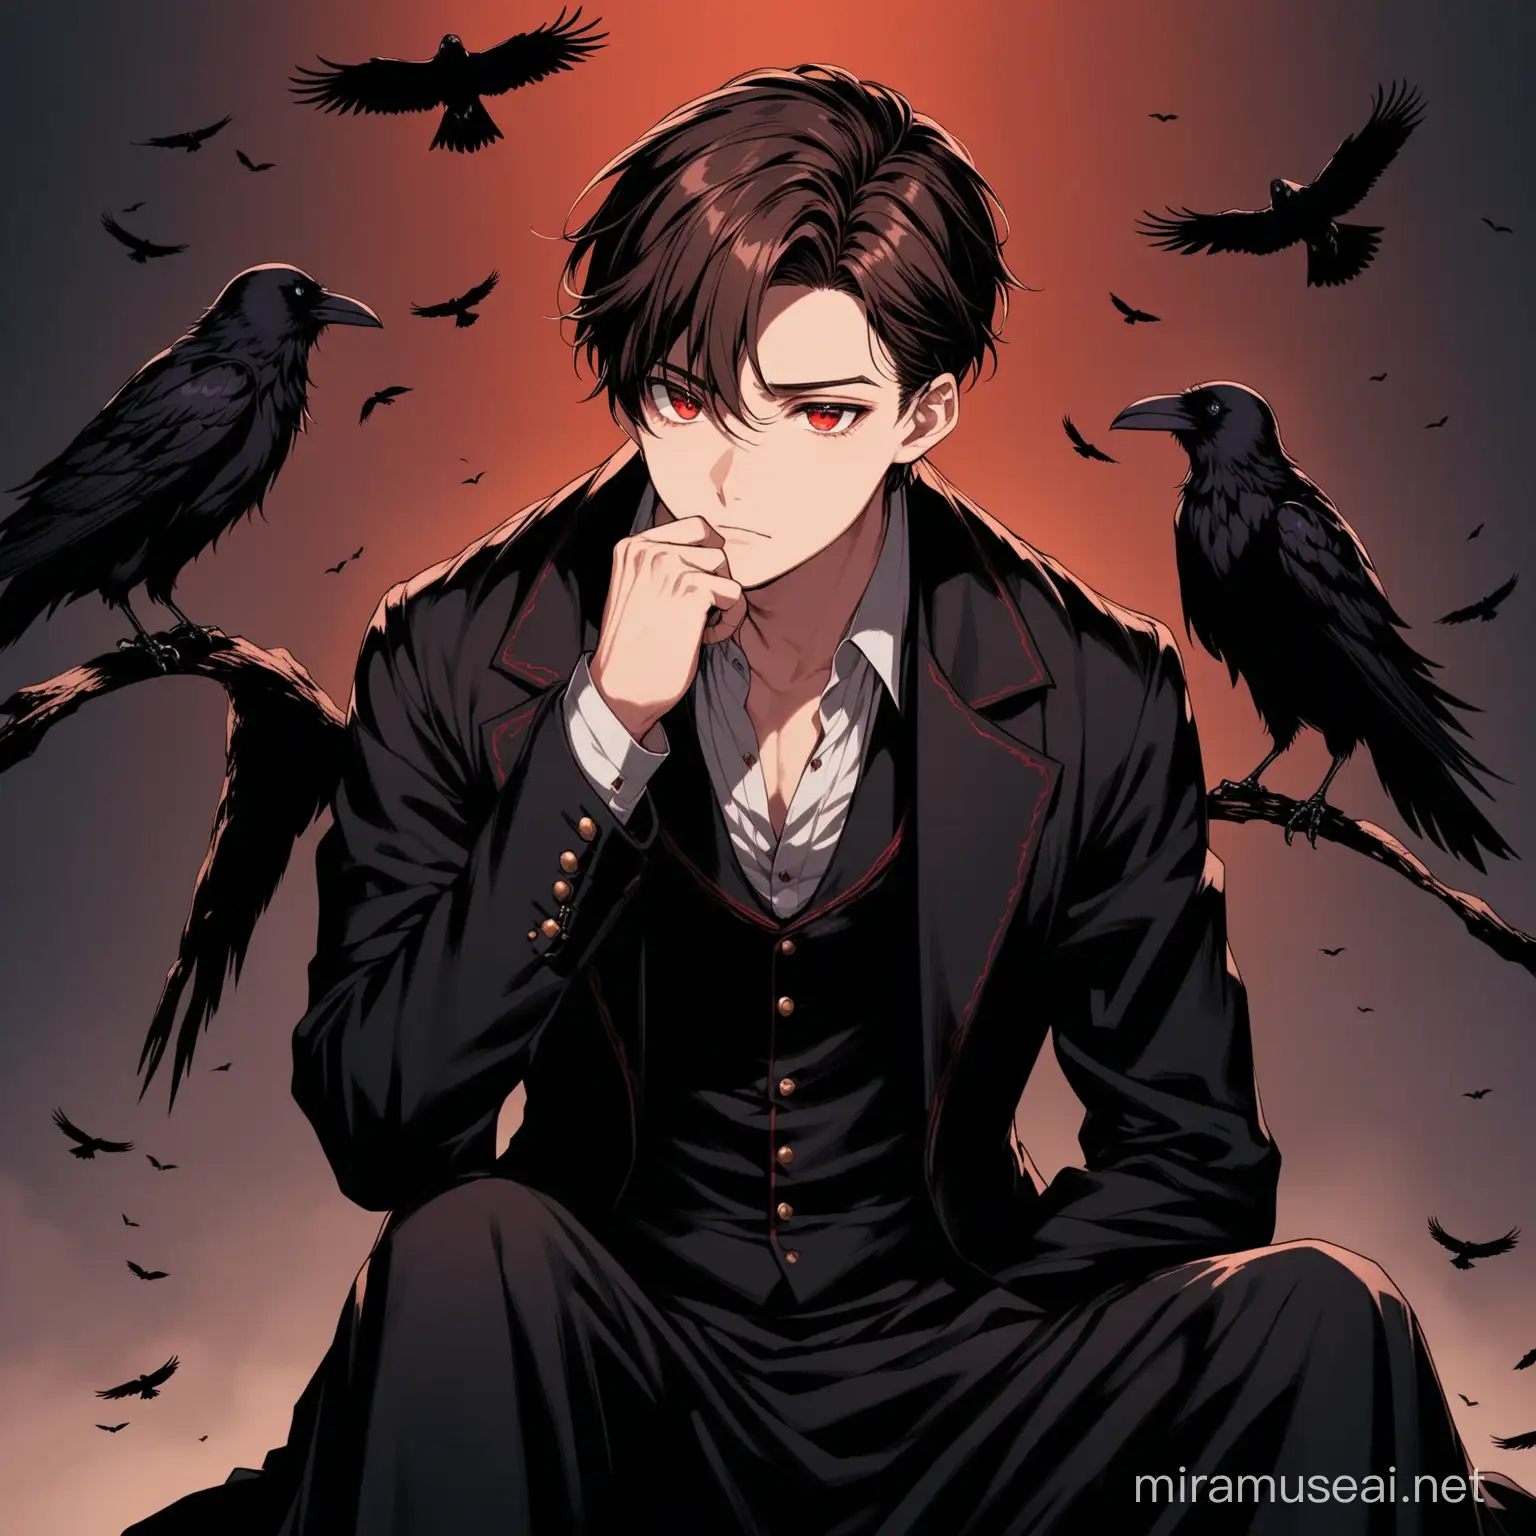 an anime handsome boy with gangster black clothes in the dark background sitting on floor and stairing sky and the dark crow with red eyes sitting on his shoulder the boy has one eye red and one eye hasel brown the boy hairstyle is so attarcting and he is wearing black 1900s dress the image should be in 8k pixels, the guys left eyes is red and right eye is brown his expressions should be eye catching also there is only one crow sitting on his hand and he is watching his crow